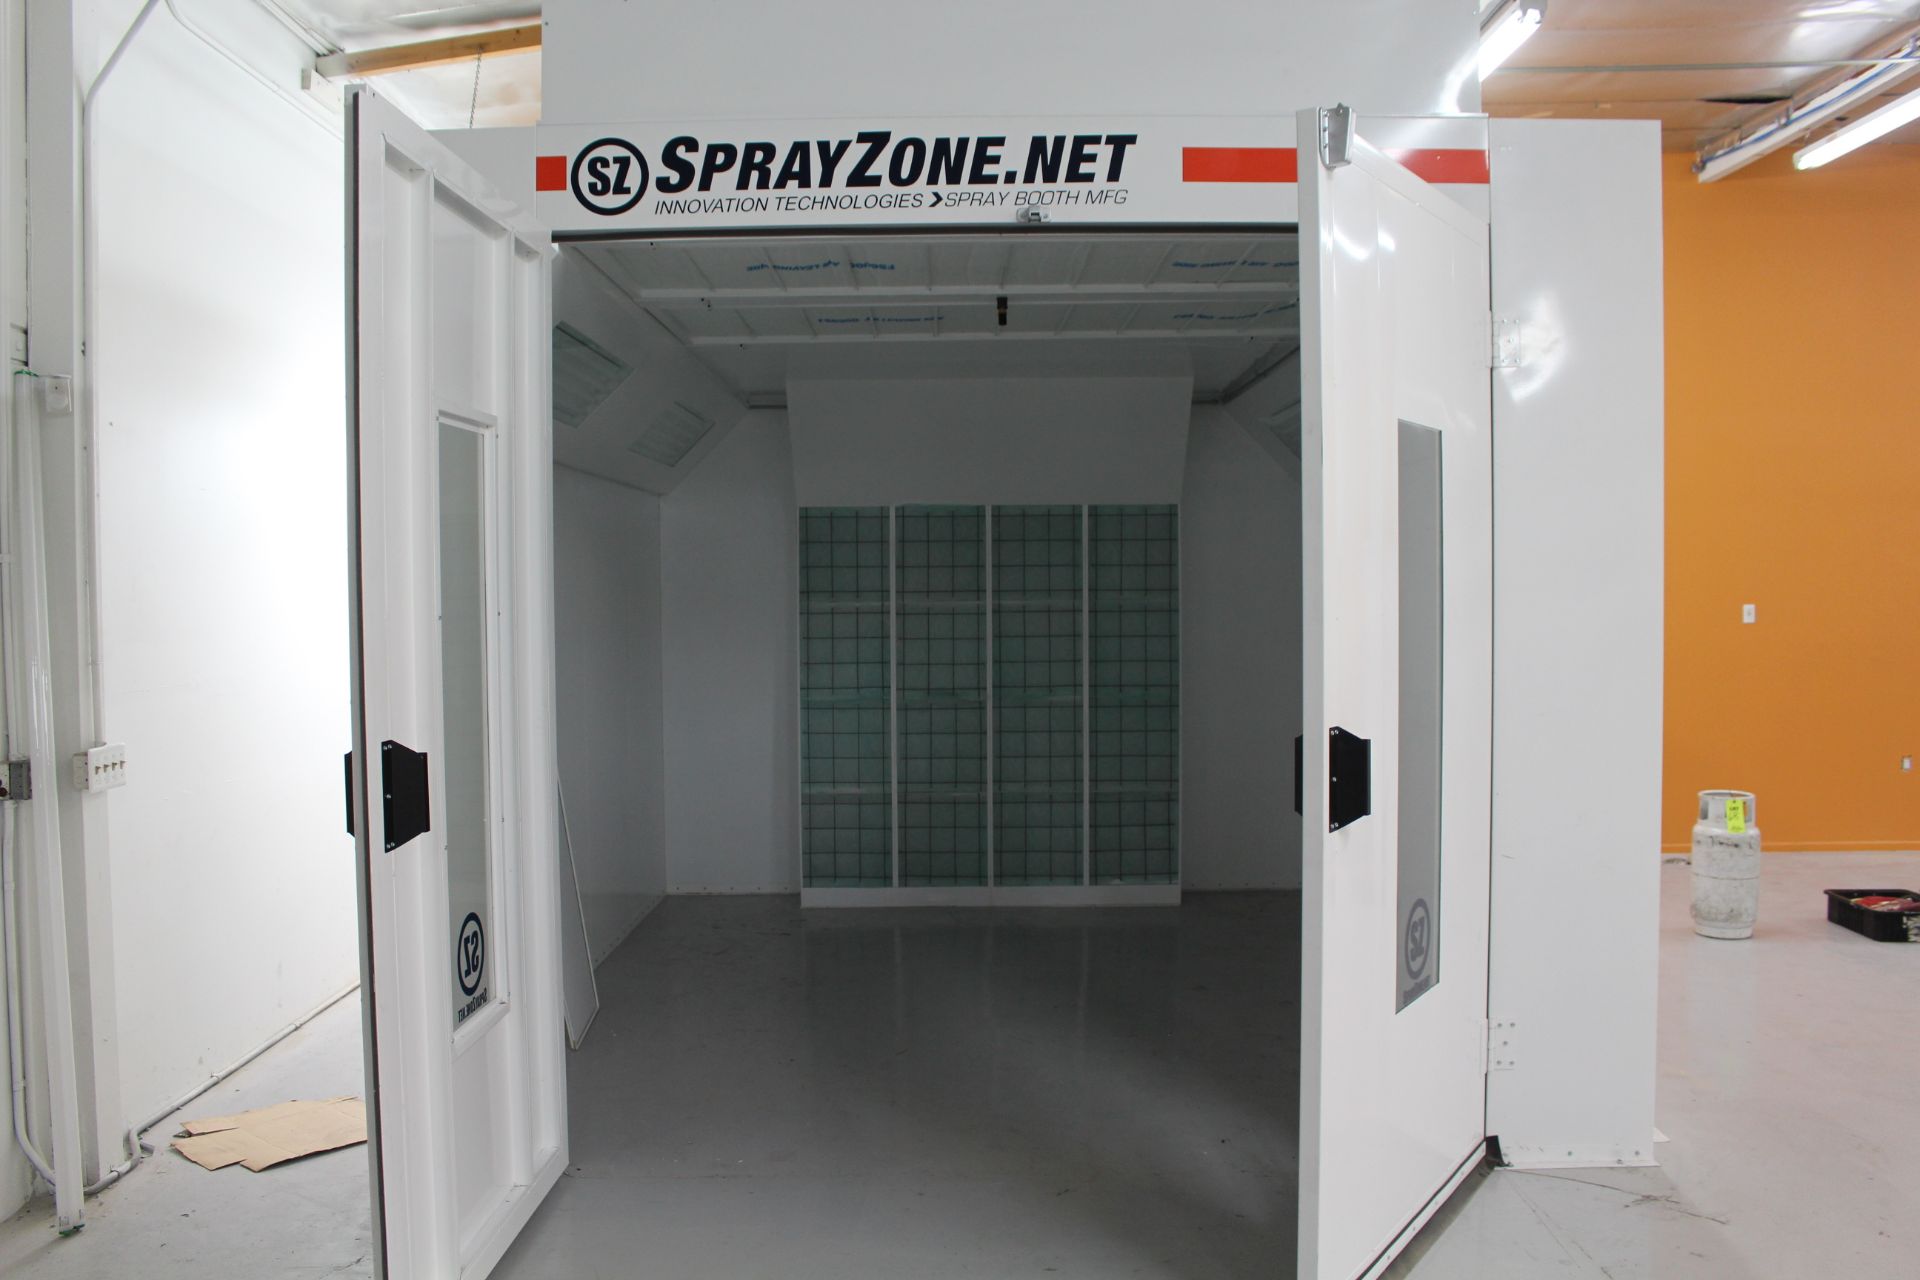 SPRAY ZONE PAINT SPRAY BOOTH, BRAND NEW, 169" LONG X 143" WIDE INSIDE DIMENSION - Image 4 of 15